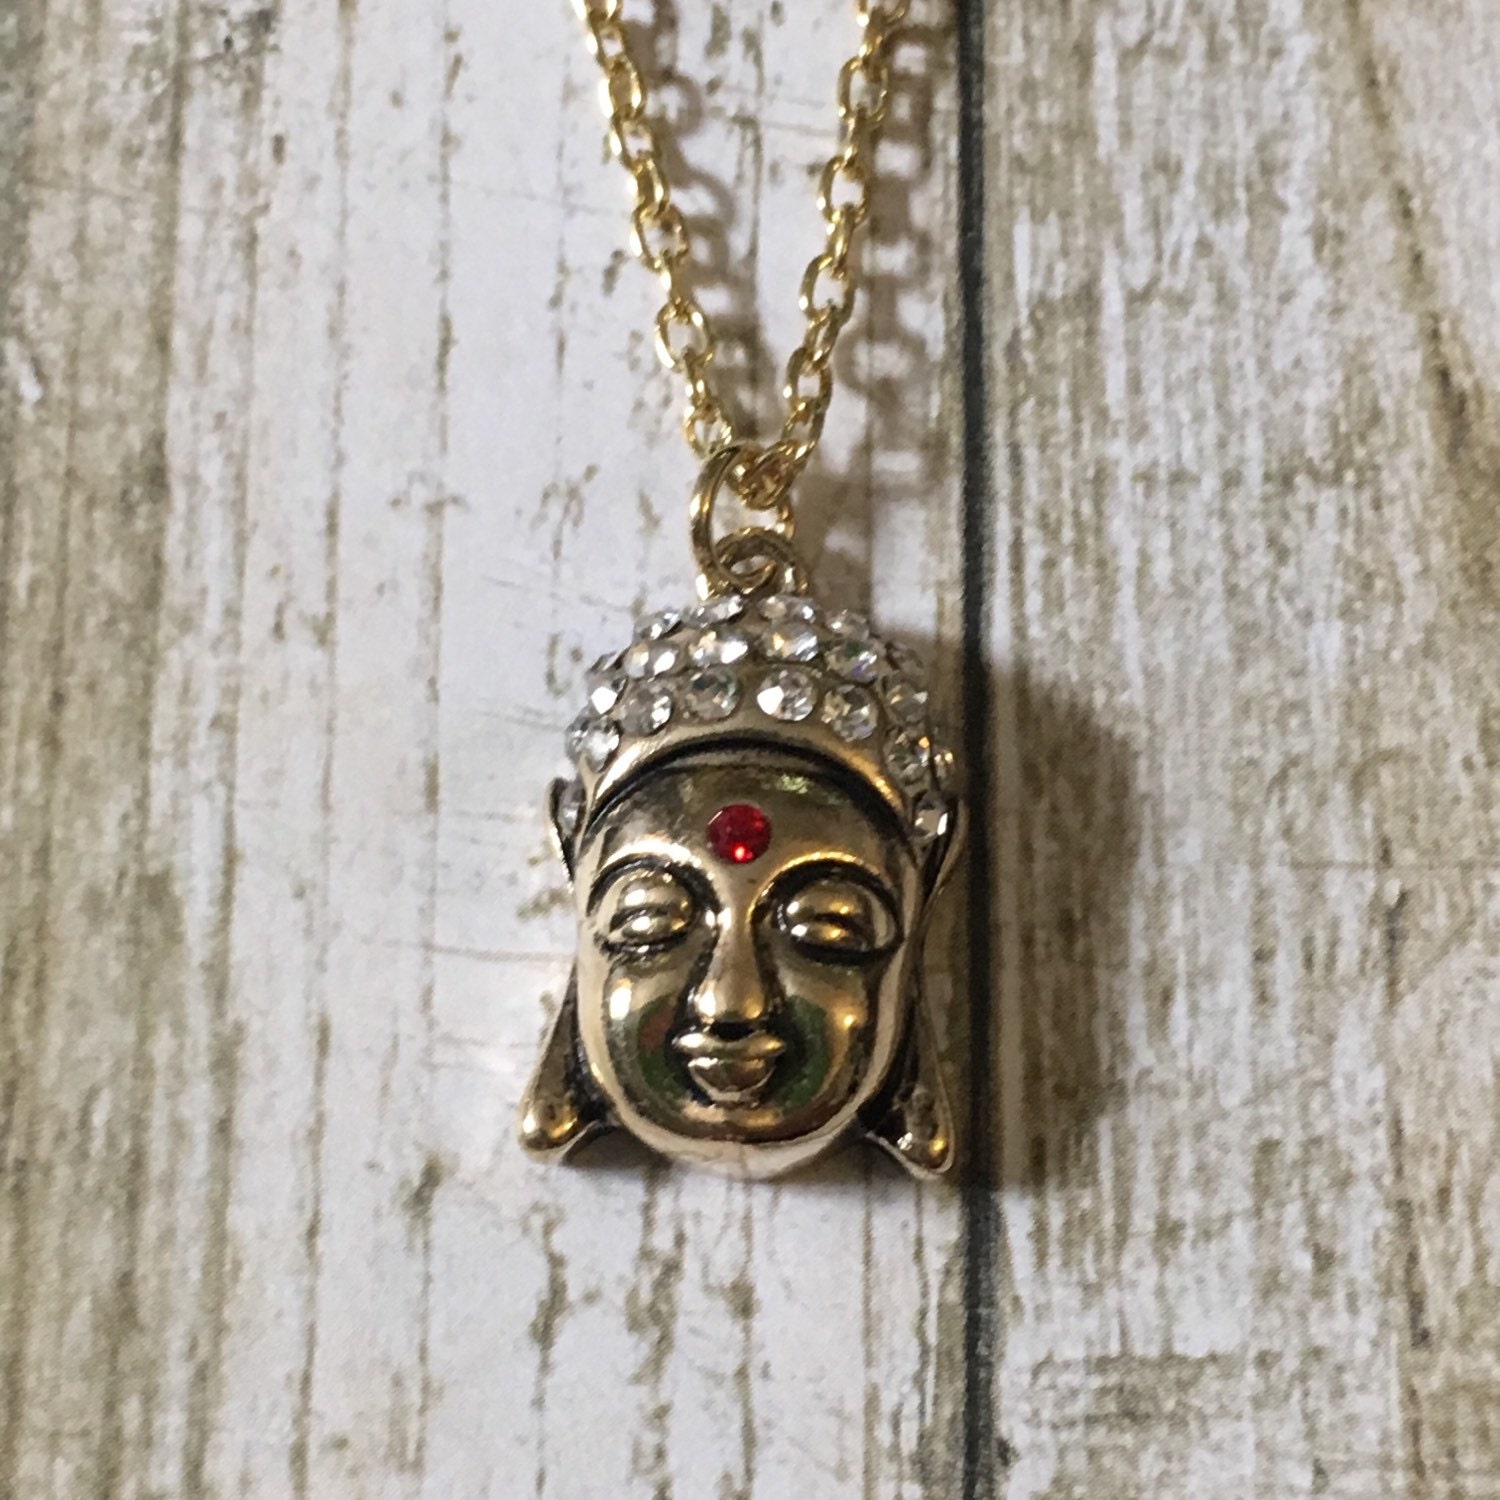 Gold buddha necklace by MGreenhalghDesigns on Etsy